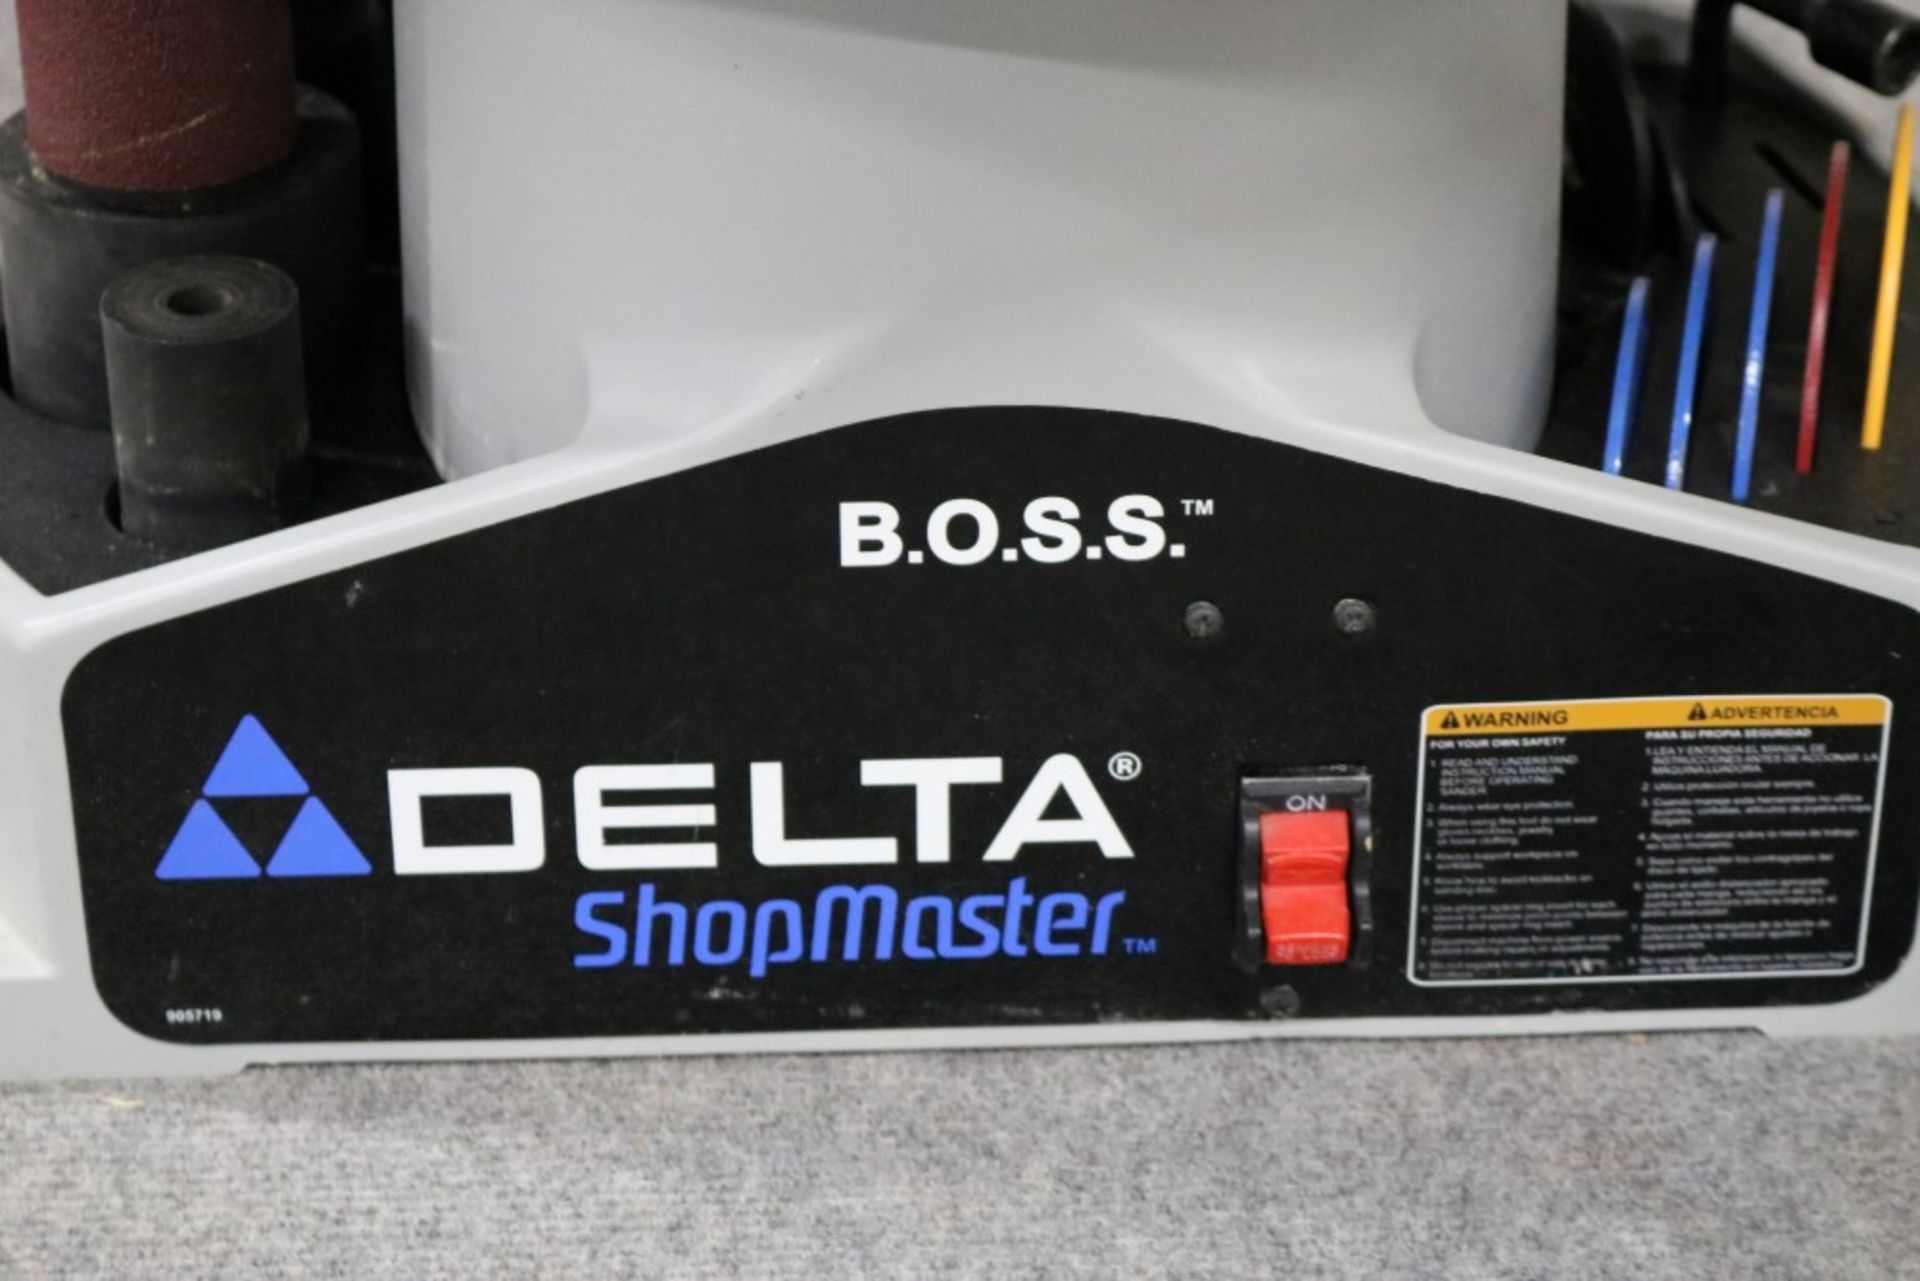 Delta B.O.S.S. Shop Master Bench Oscillating Spindle Sander, 1/4 HP, SN 032173, 1725 RPM, with - Image 4 of 9